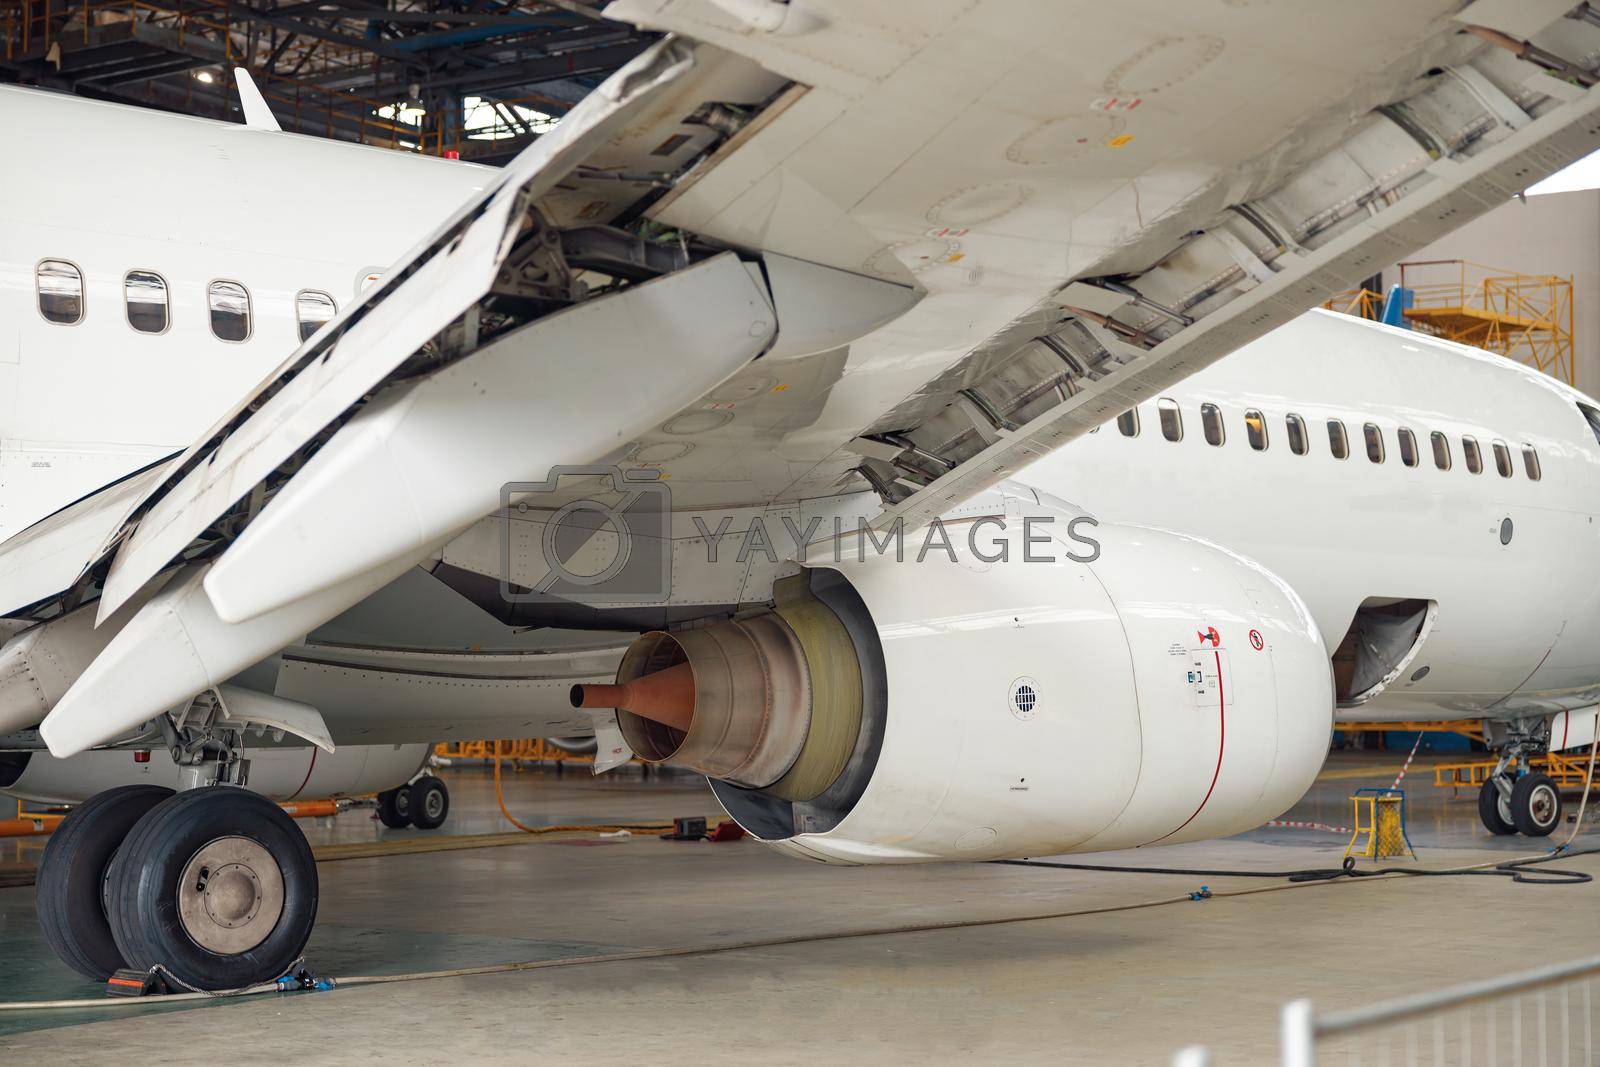 Royalty free image of Close up shot of aircraft engine jet under maintenance in the hangar indoors by Yaroslav_astakhov